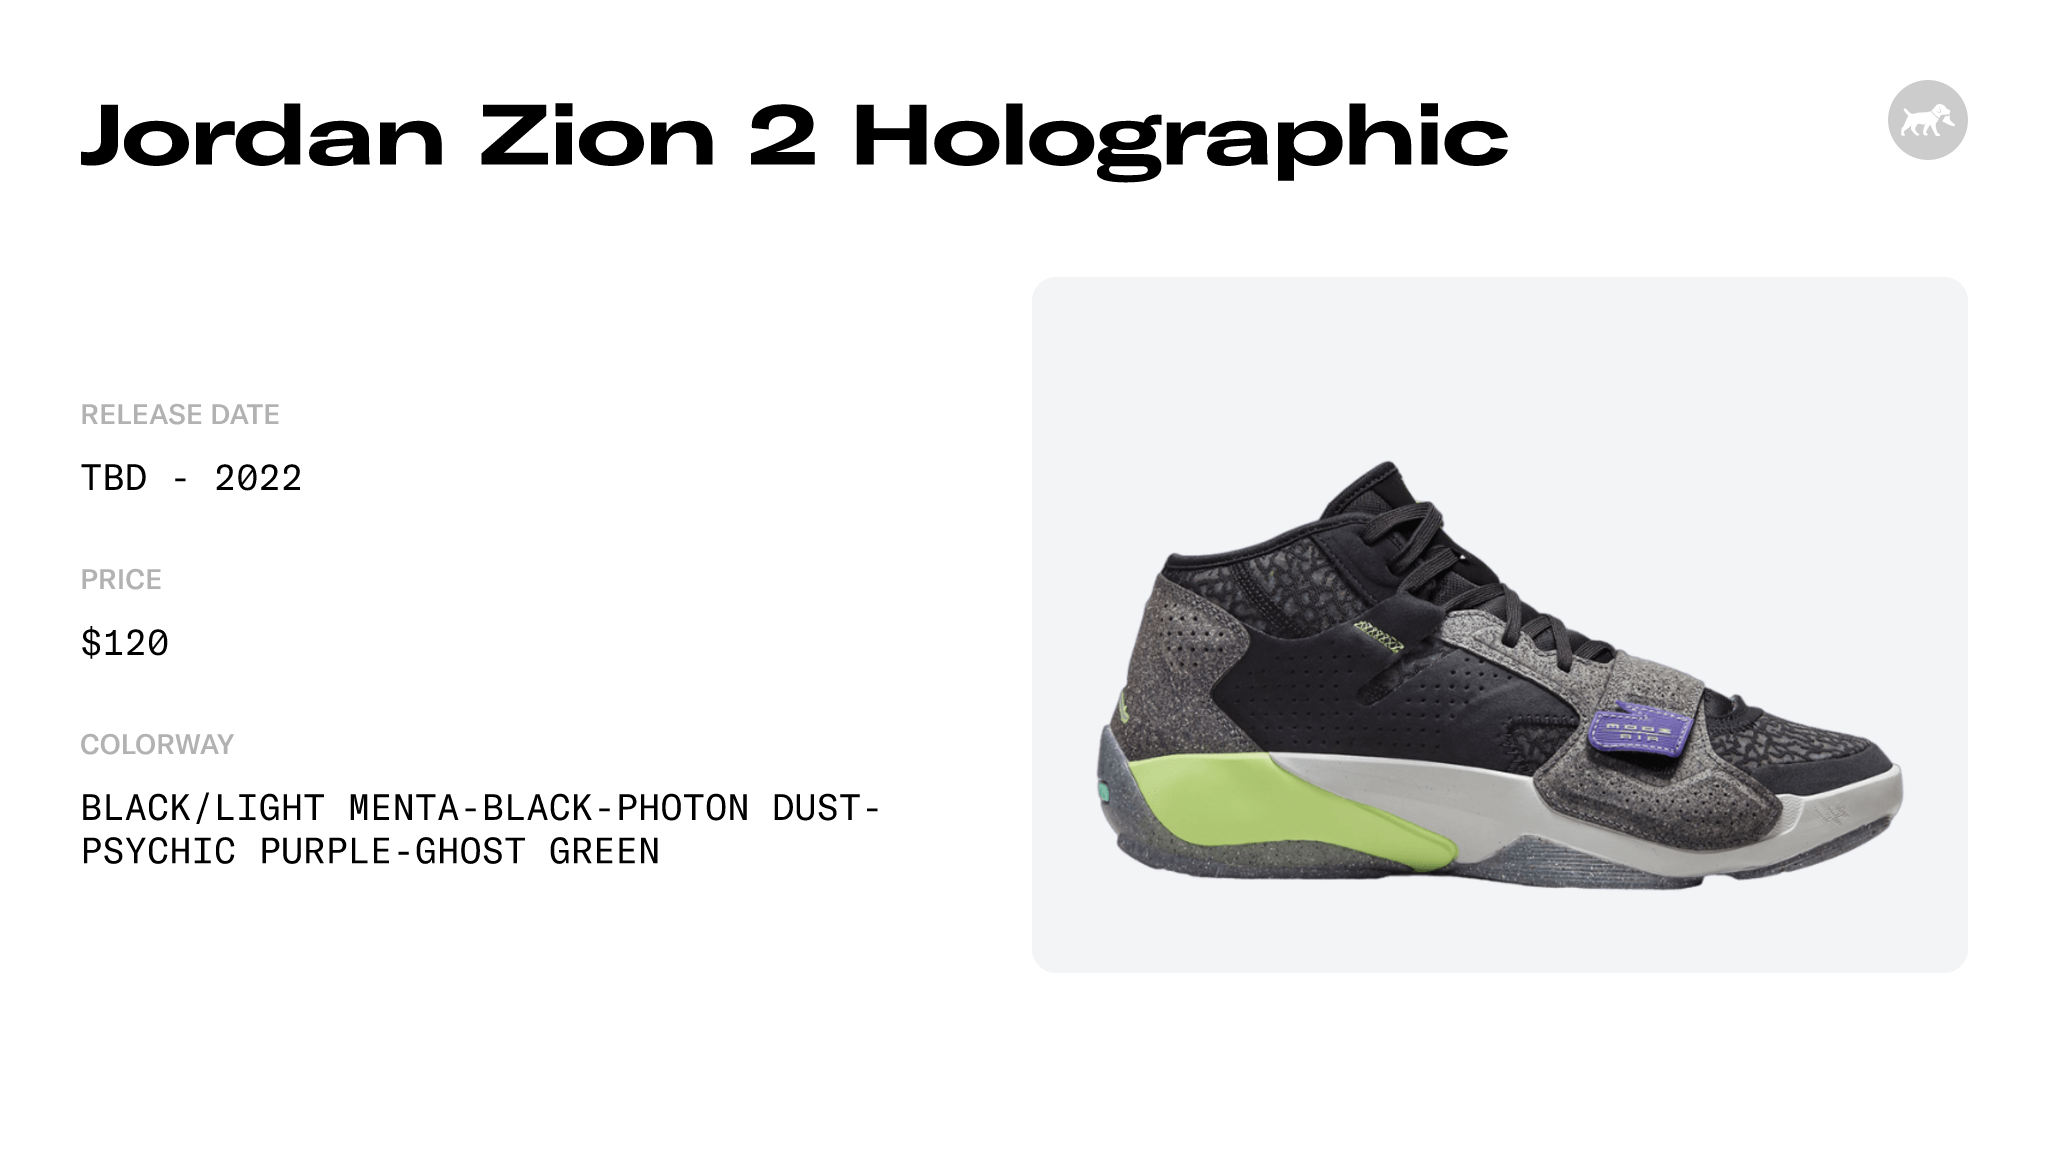 Jordan Zion 2 Holographic - DV0548-030 Raffles and Release Date